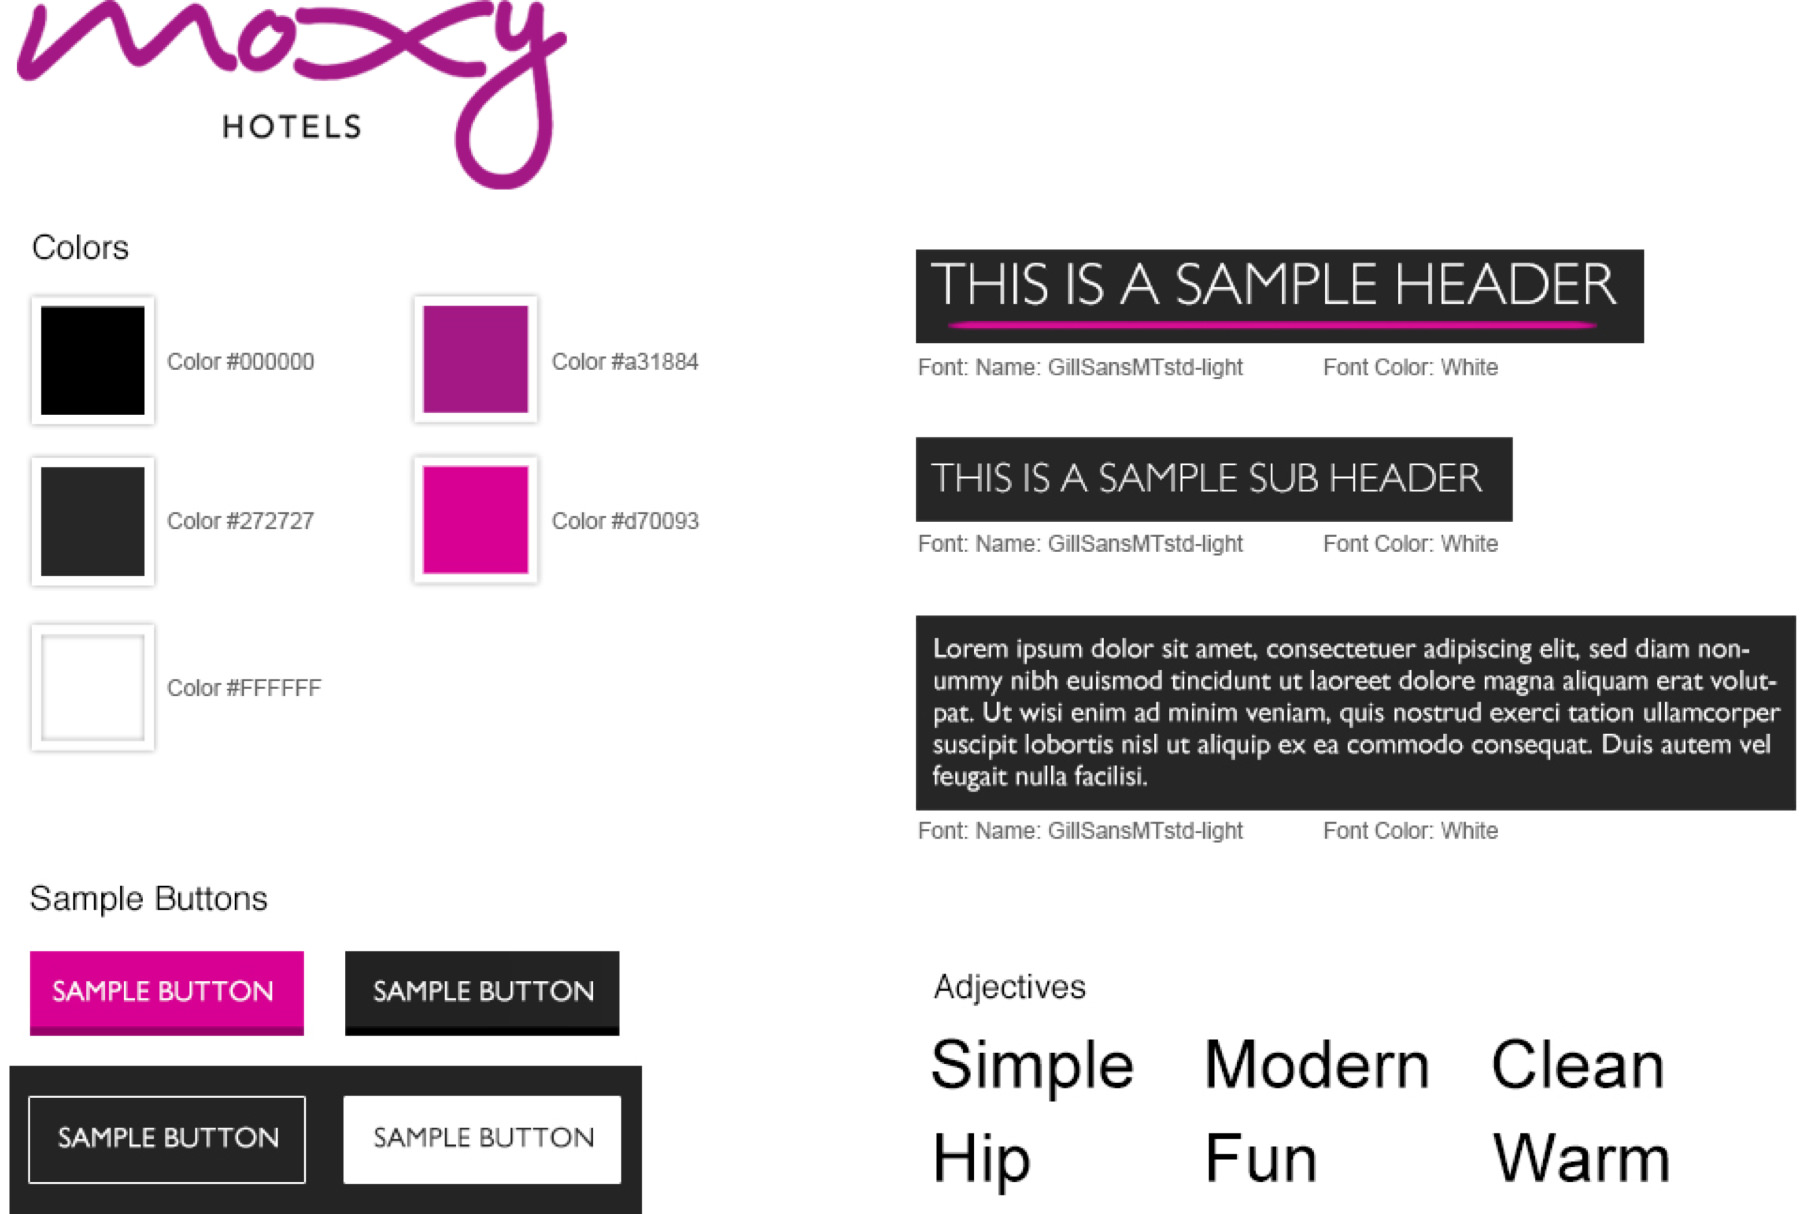 The Moxy style guide